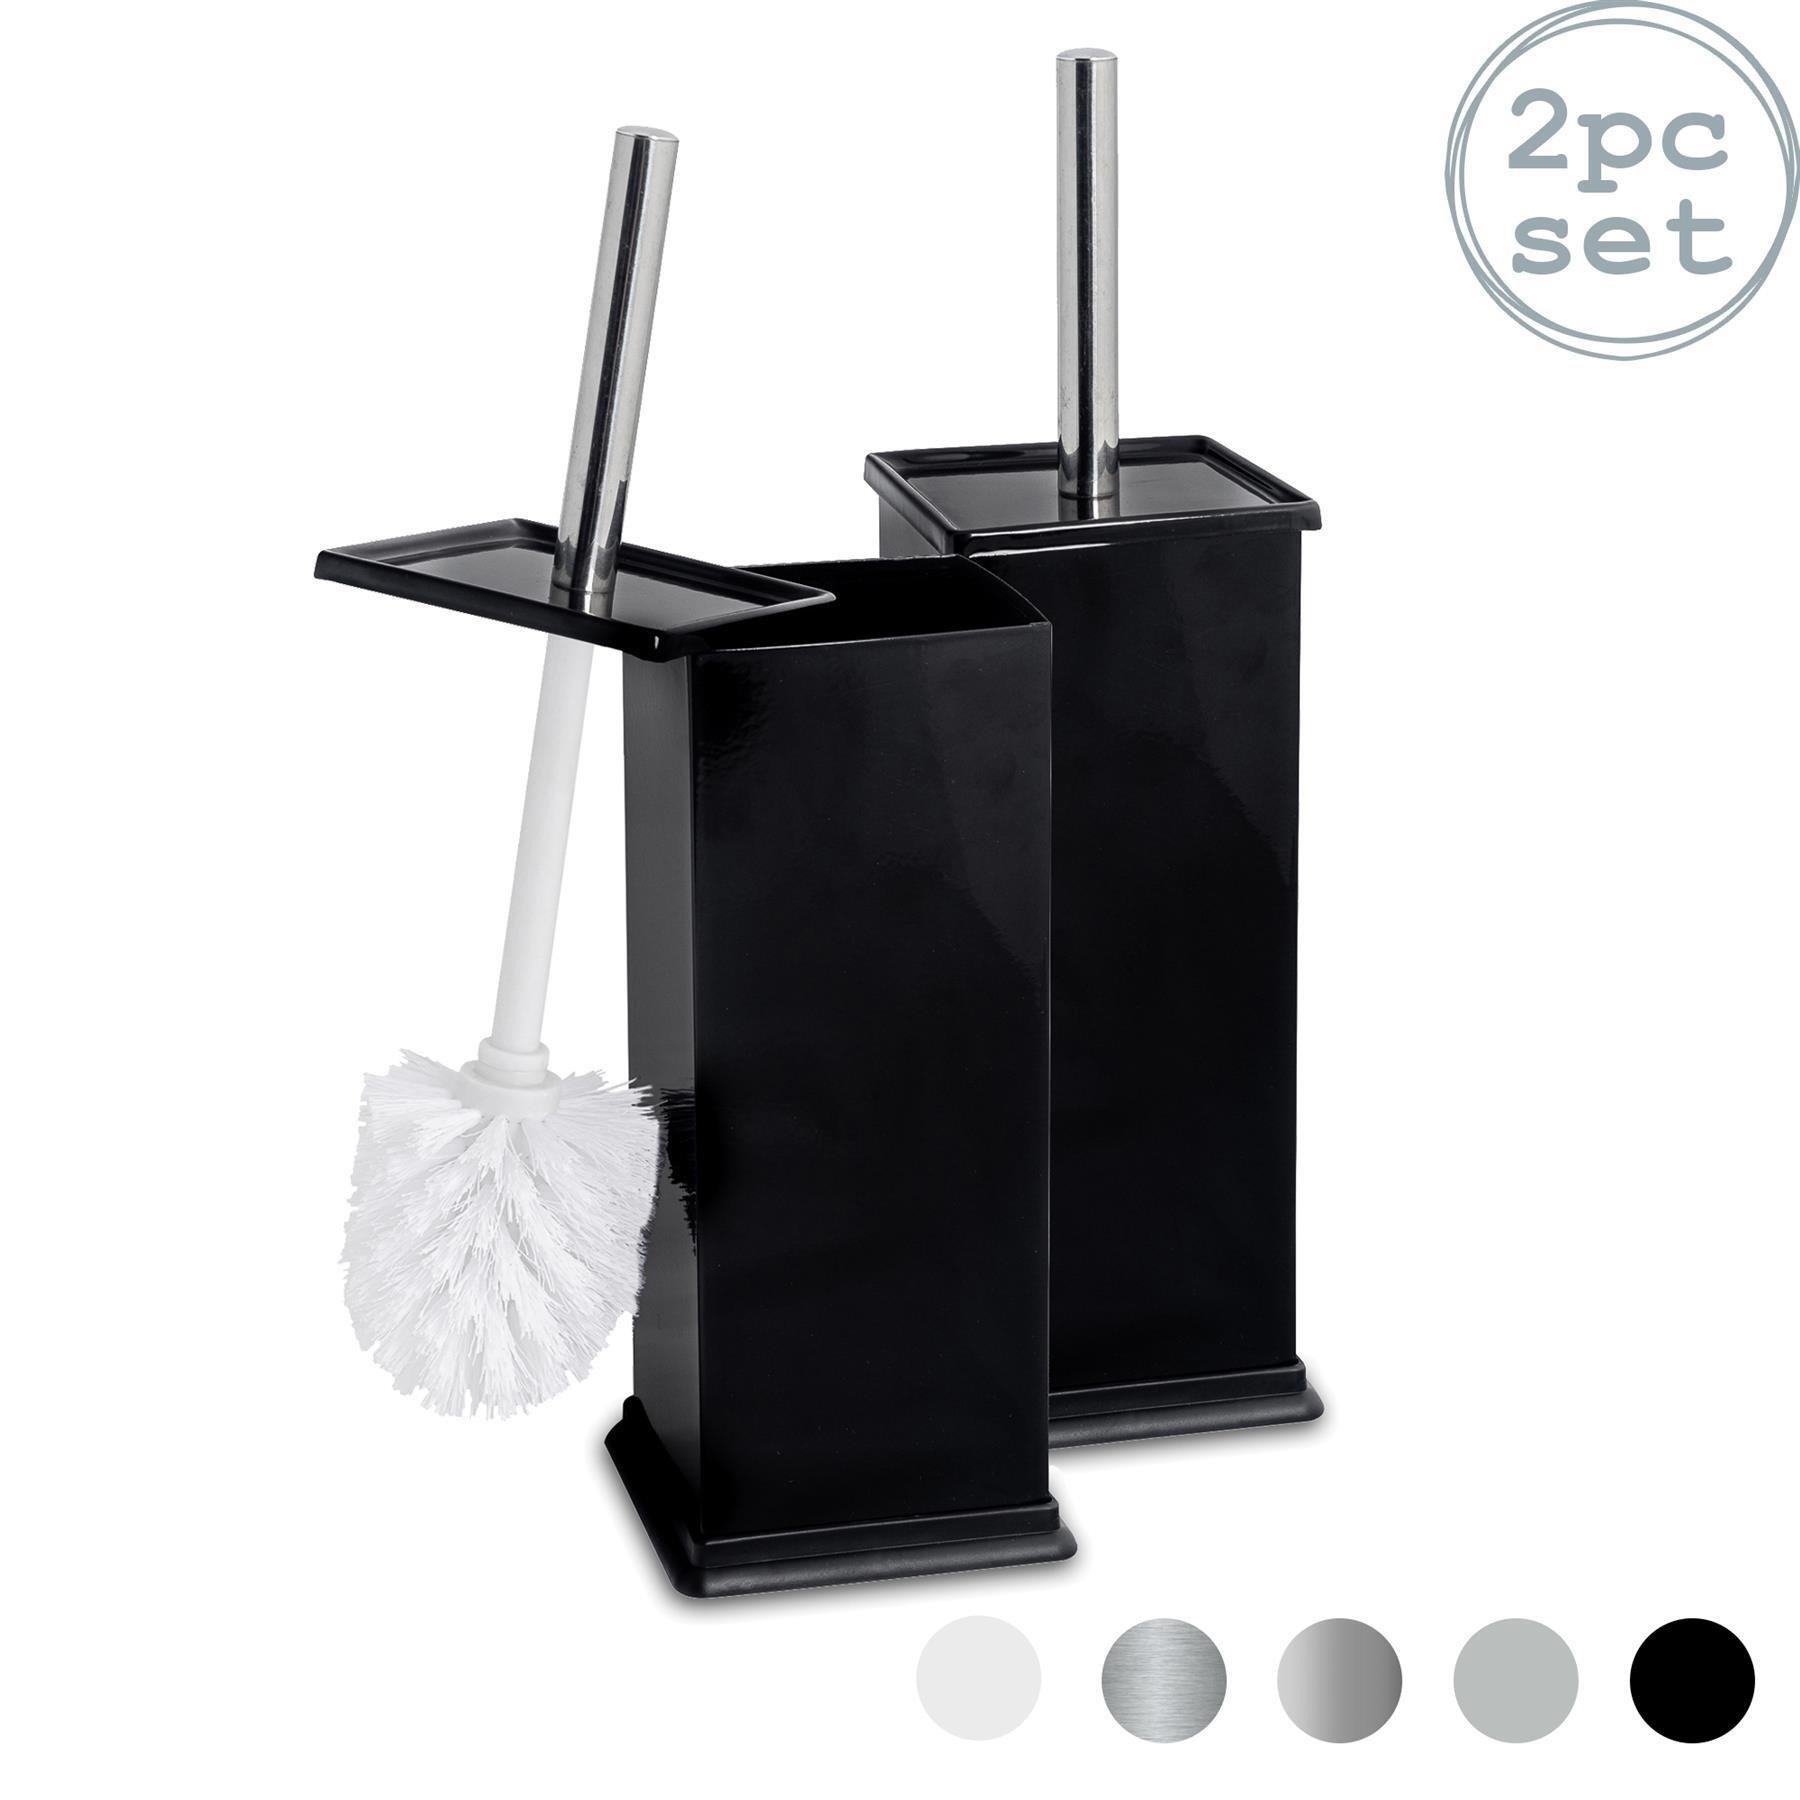 Square Toilet Brushes Pack of 2 - image 1